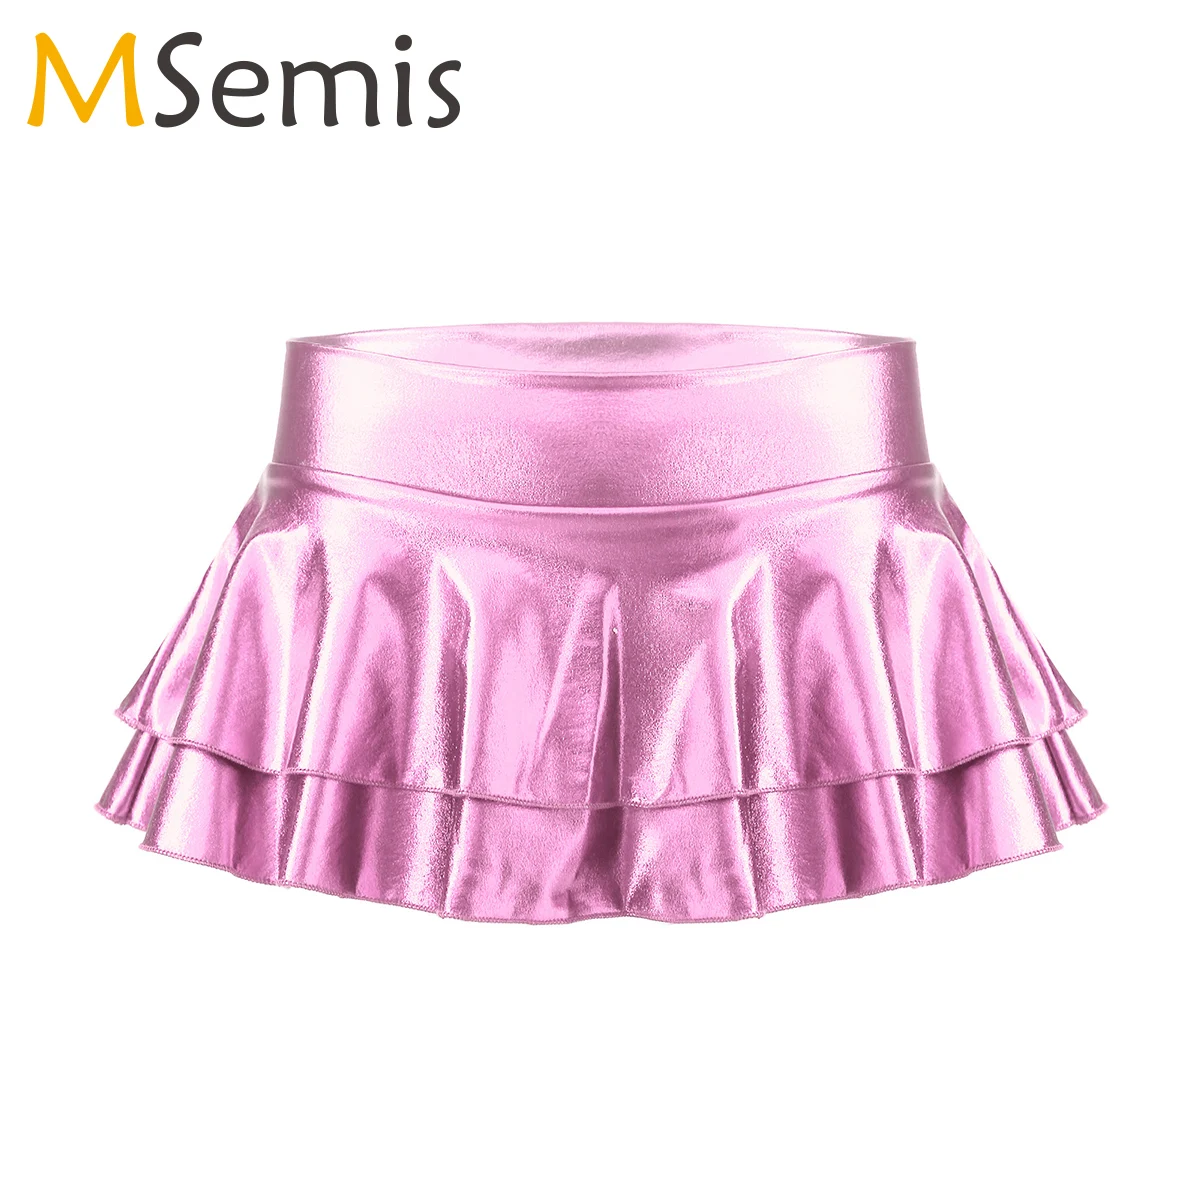 

Women Shiny Metallic Low Rise Ruffled Pole Dance Shorts Skirt Leather Club Party Dancing Festival Rave Costume Sexy Mini Skirts